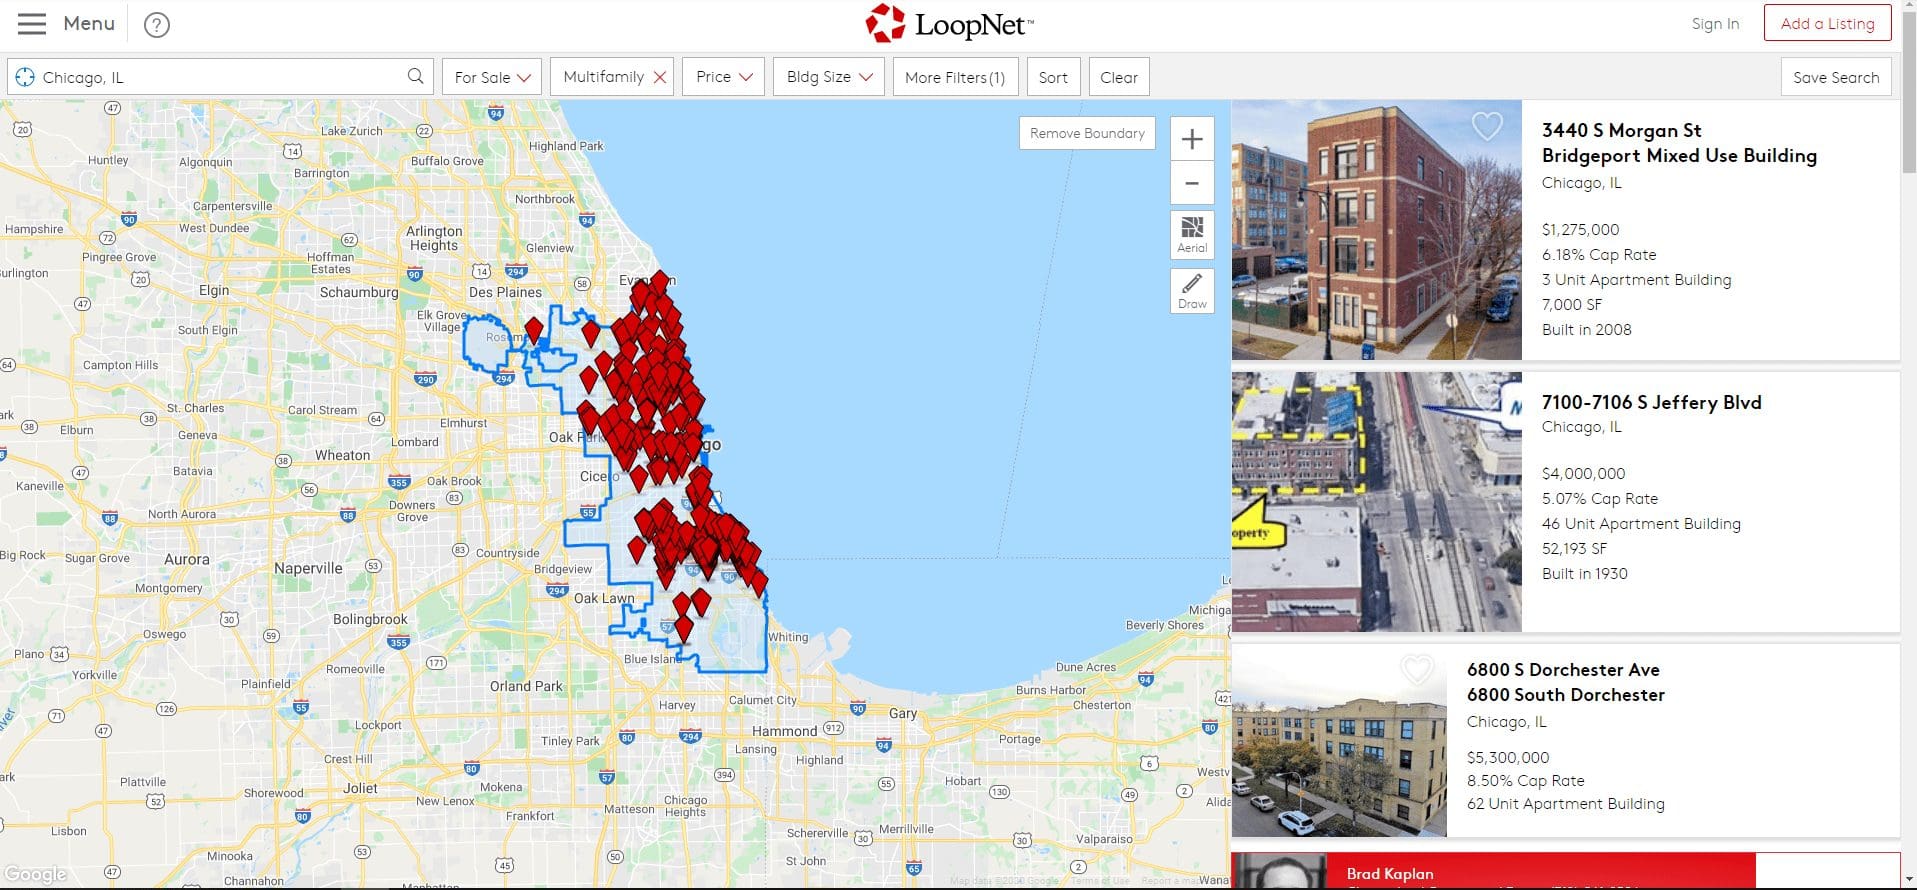 Screenshot of an apartment building for sale on Loopnet